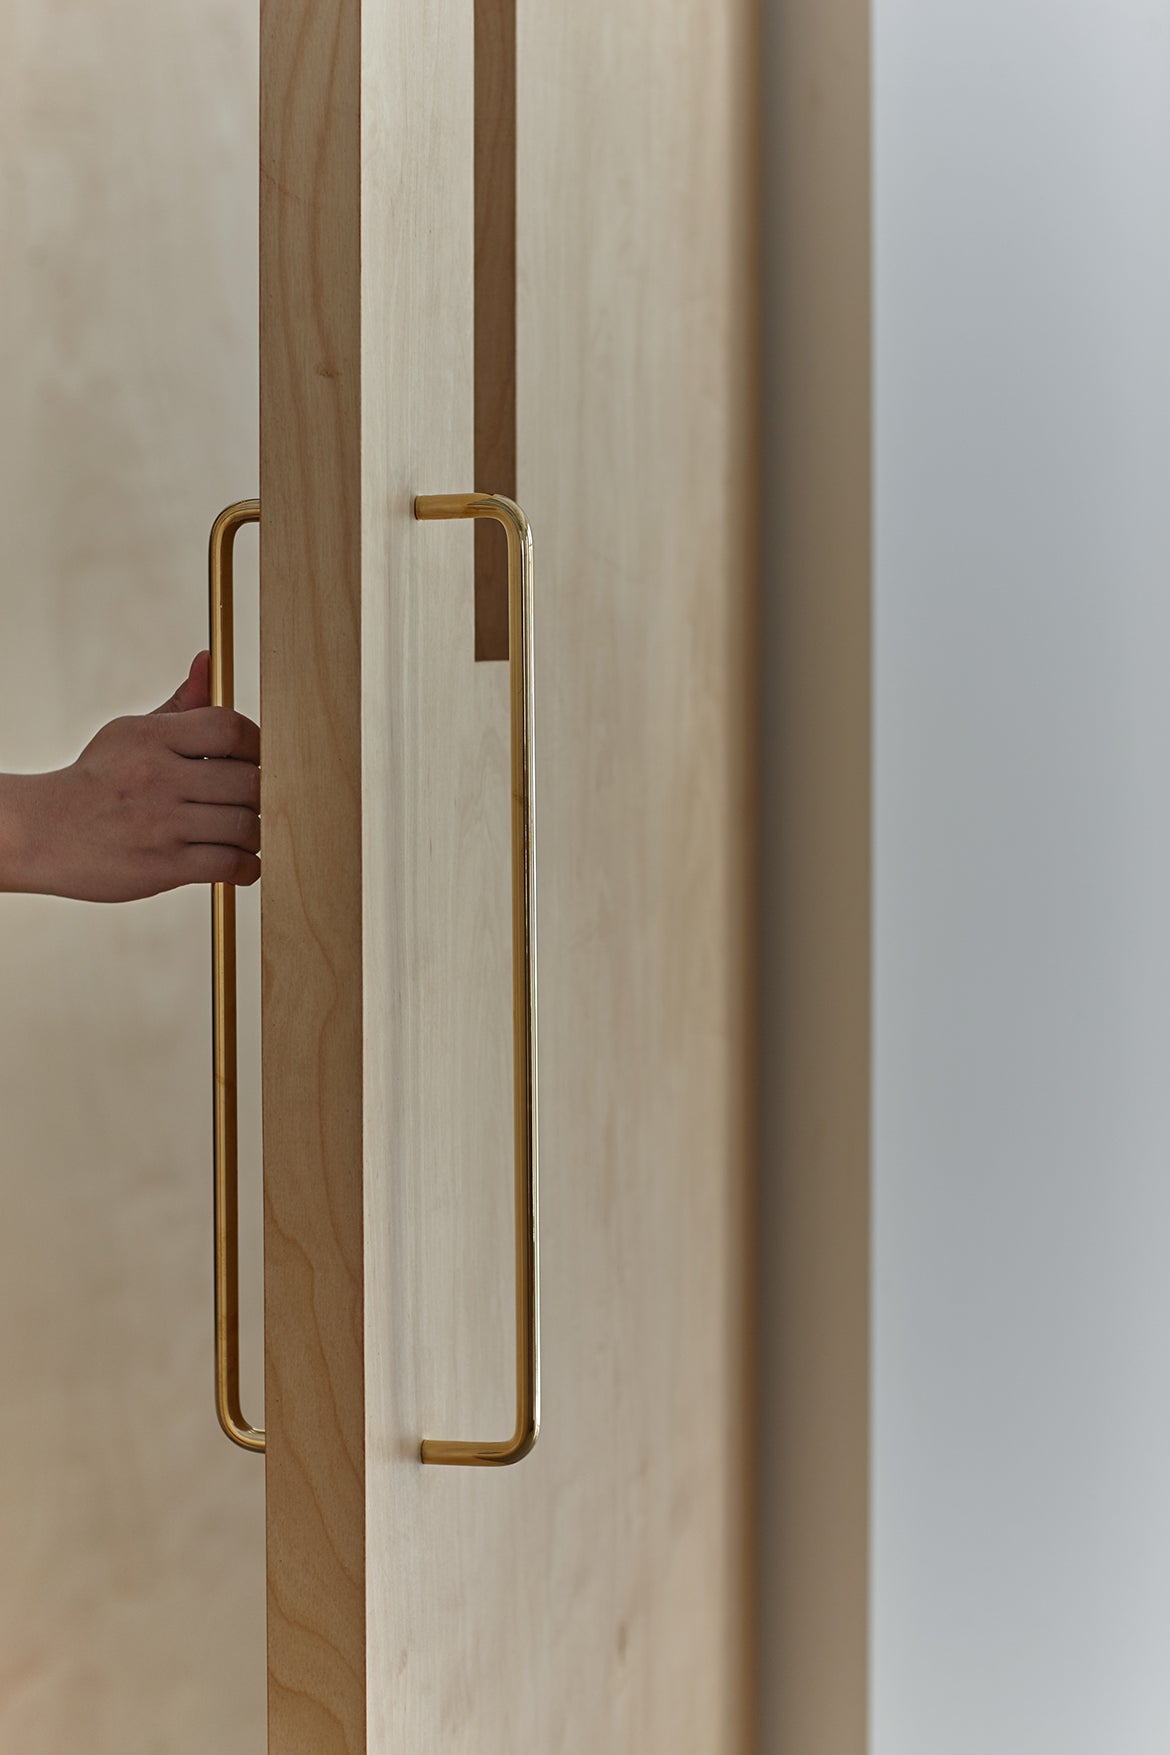 Solid Polished Brass Handles